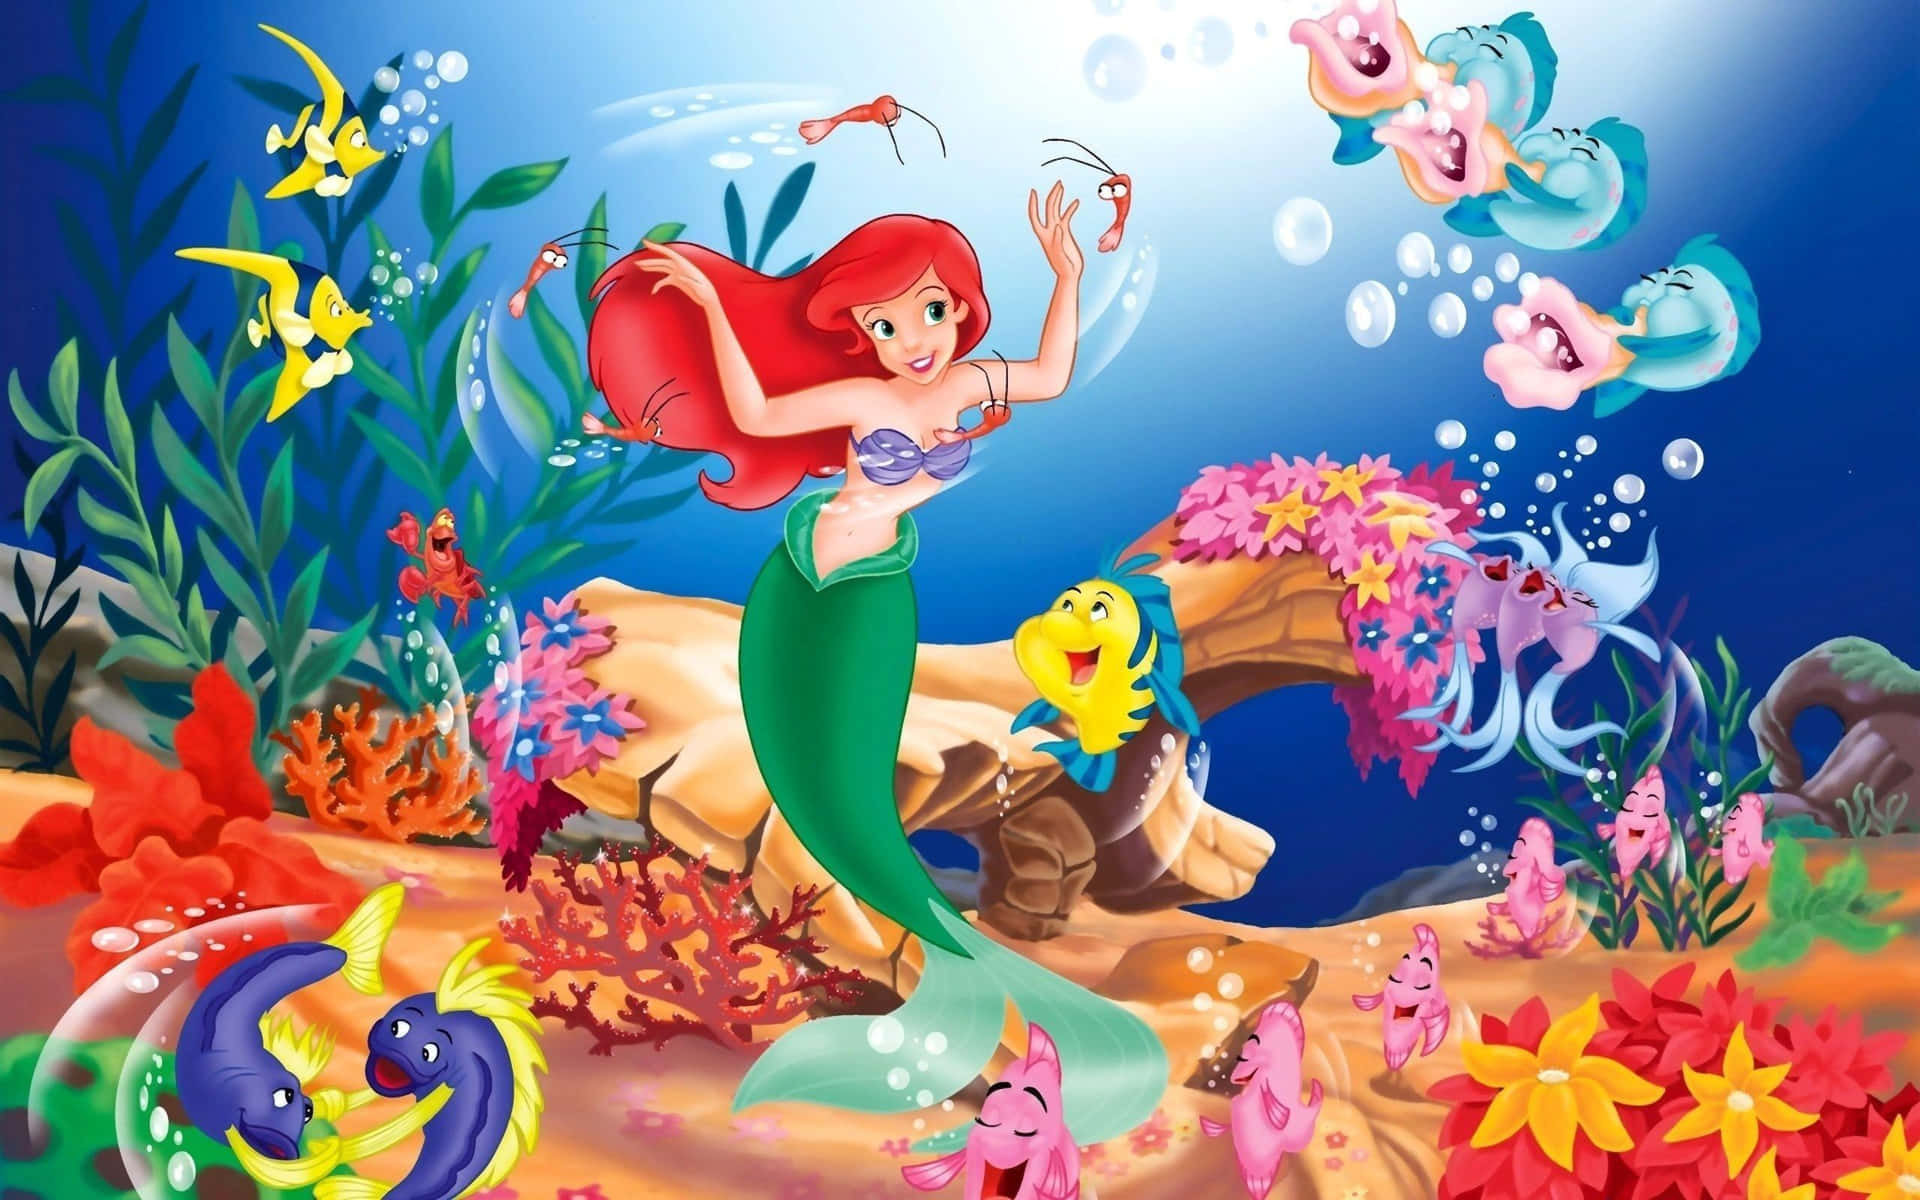 Download Ariel the Little Mermaid Saves The Day